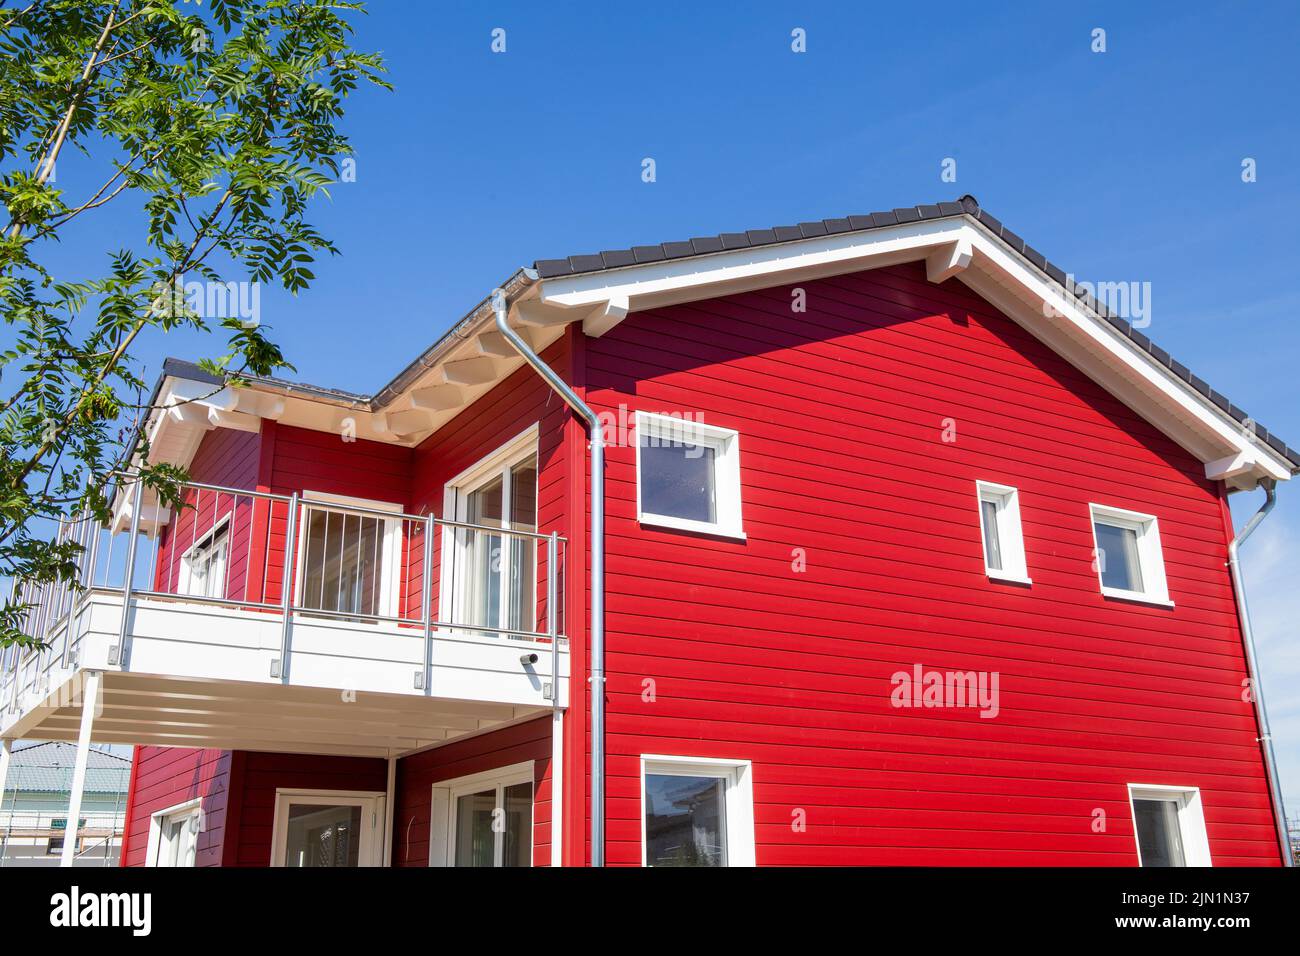 New red wooden house in Scandinavian style Stock Photo